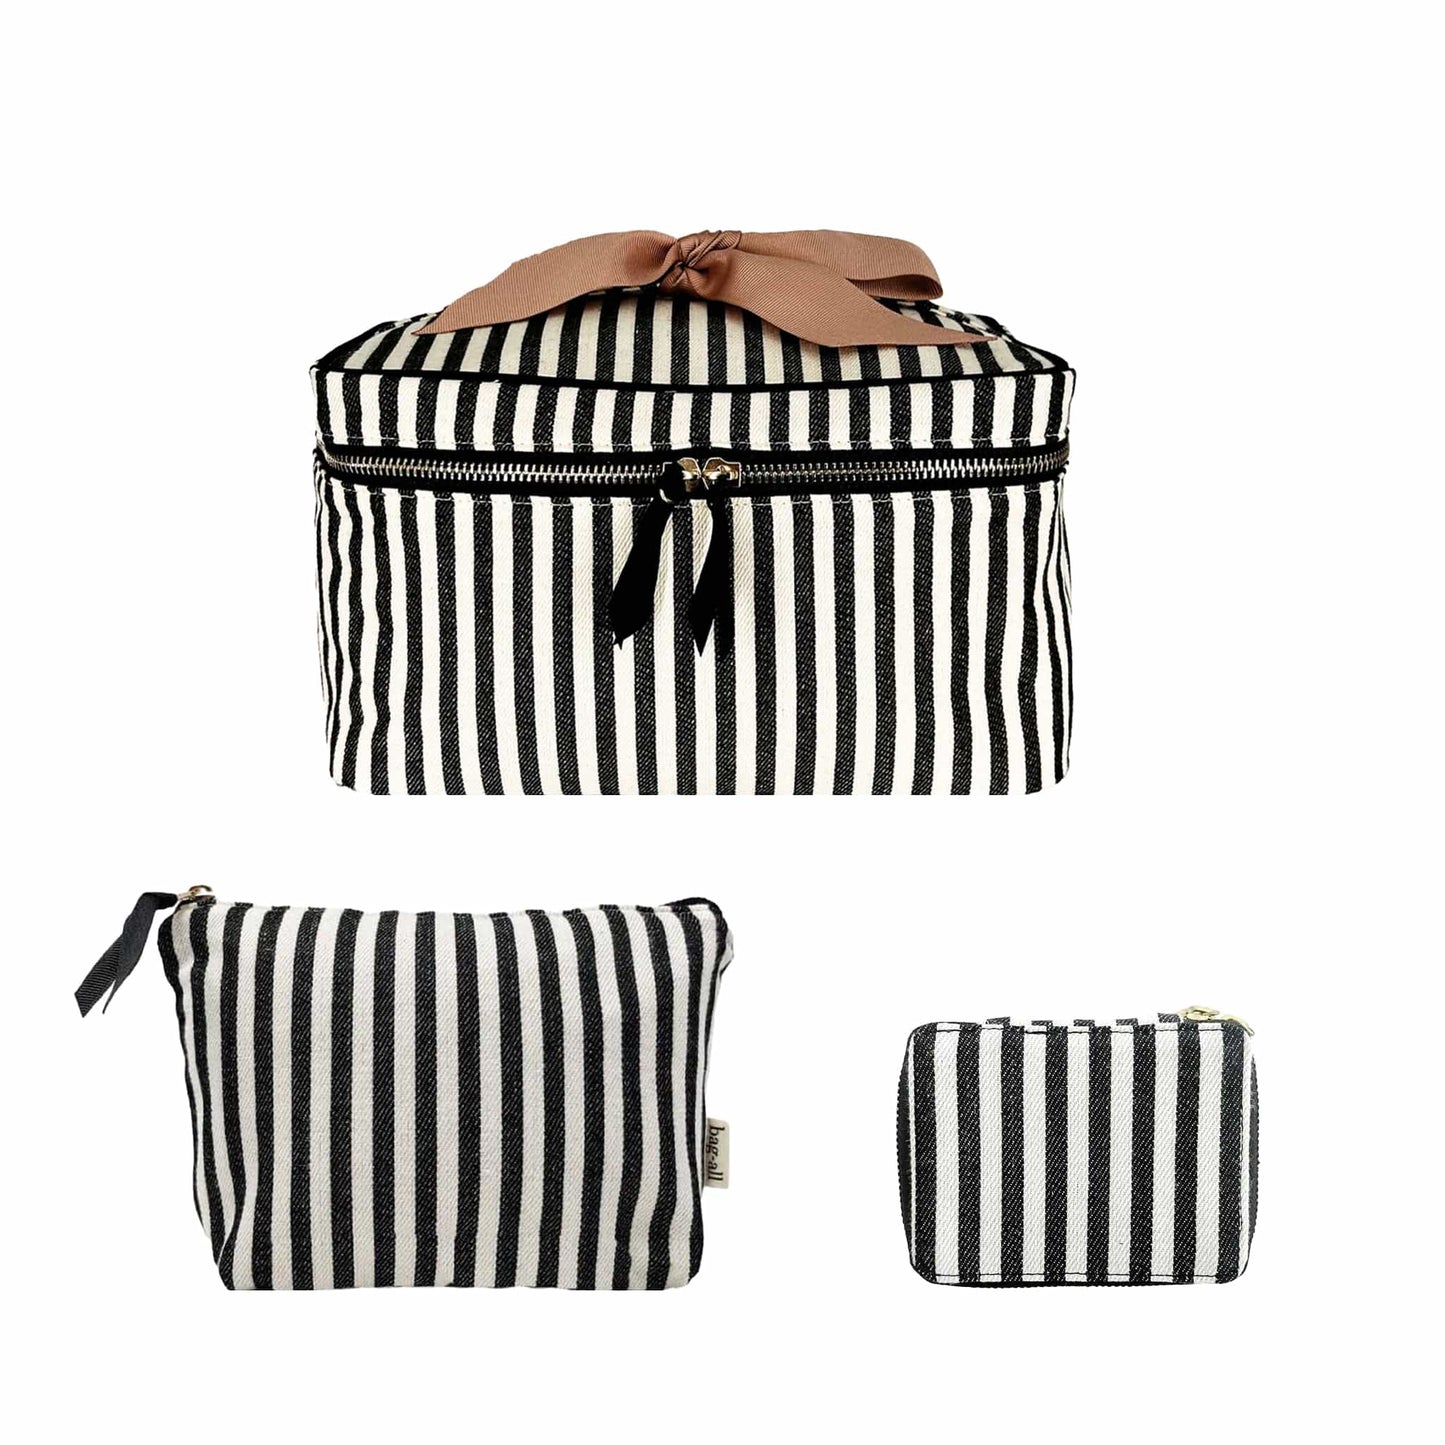 Cutest Striped Travel Gift Set Deal 3-Pack | Bag-all